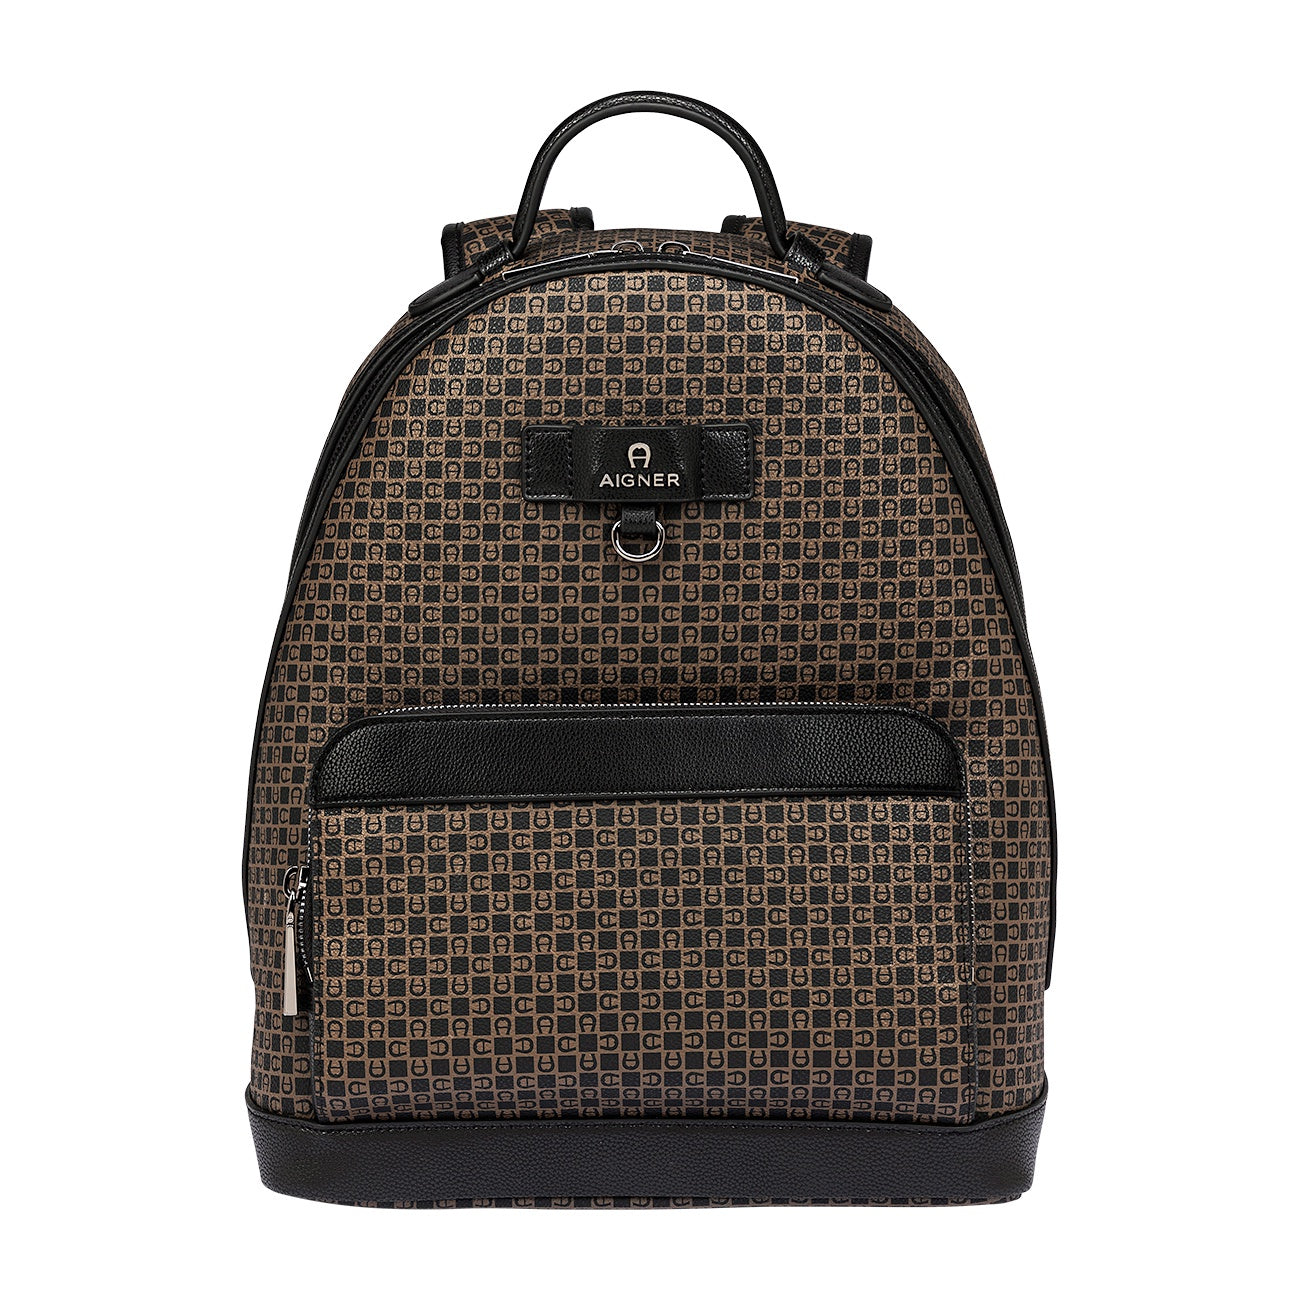 THE CORE BACKPACK S